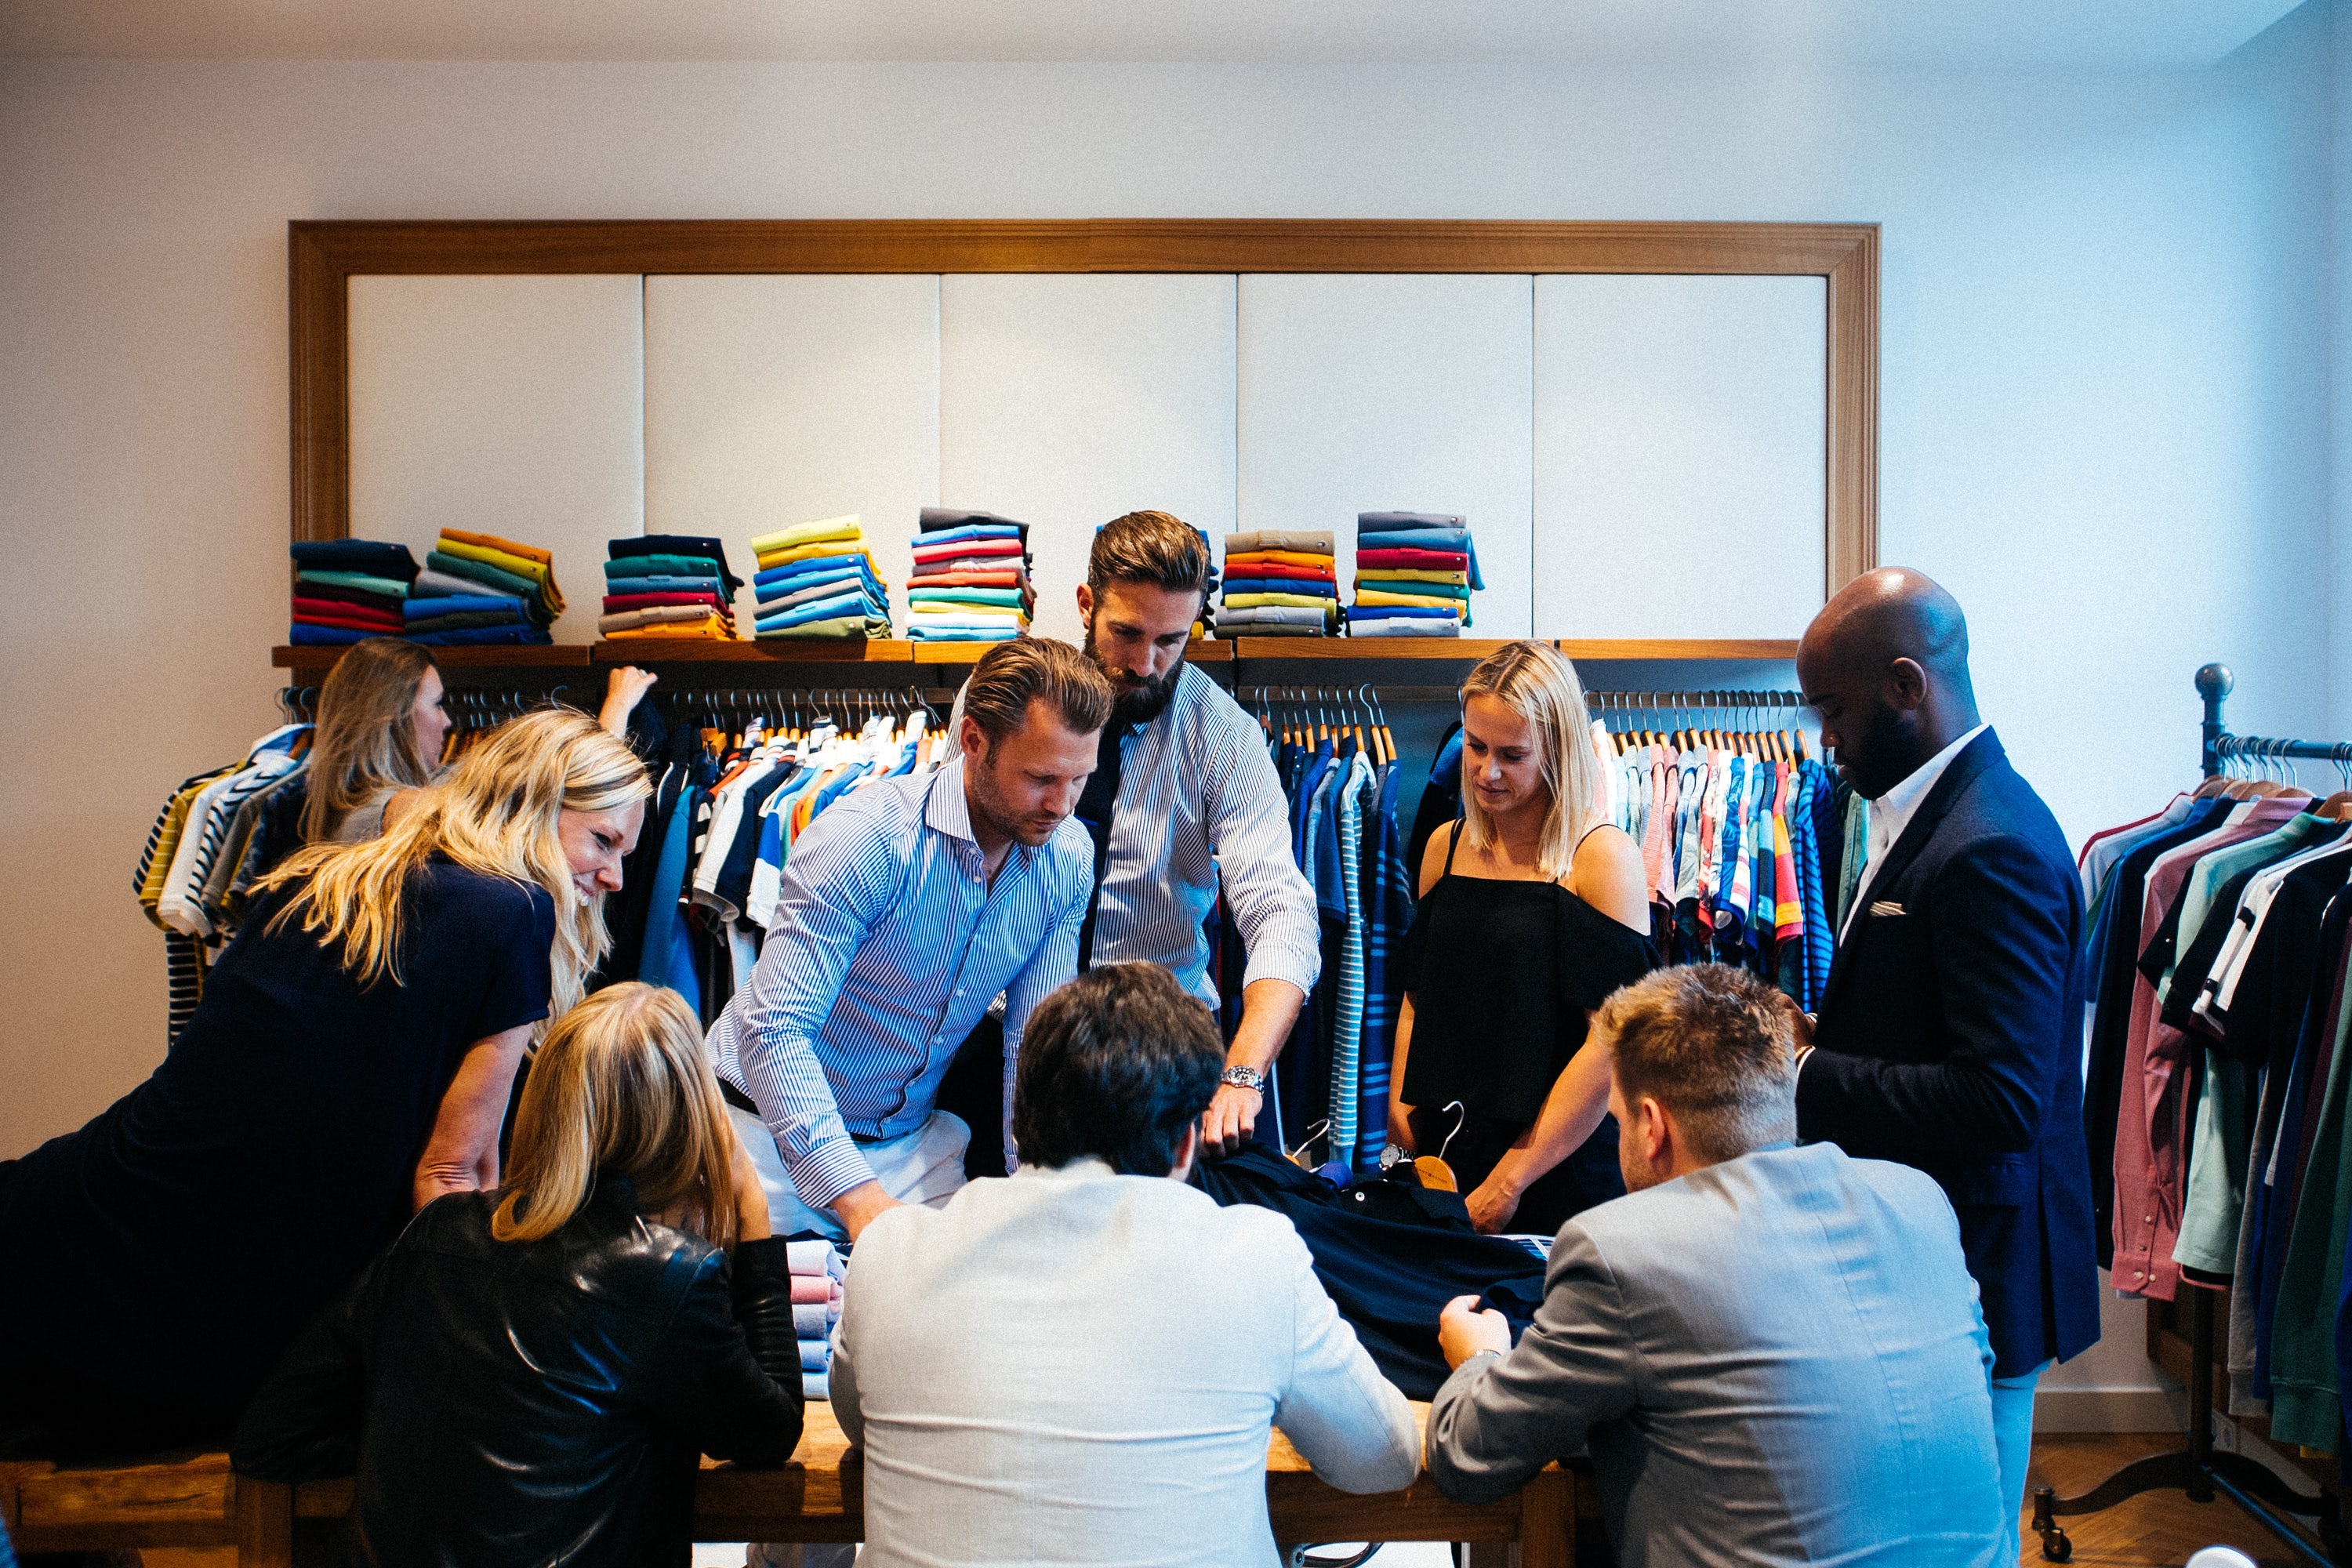 Tommy Hilfiger: A Culture Innovation